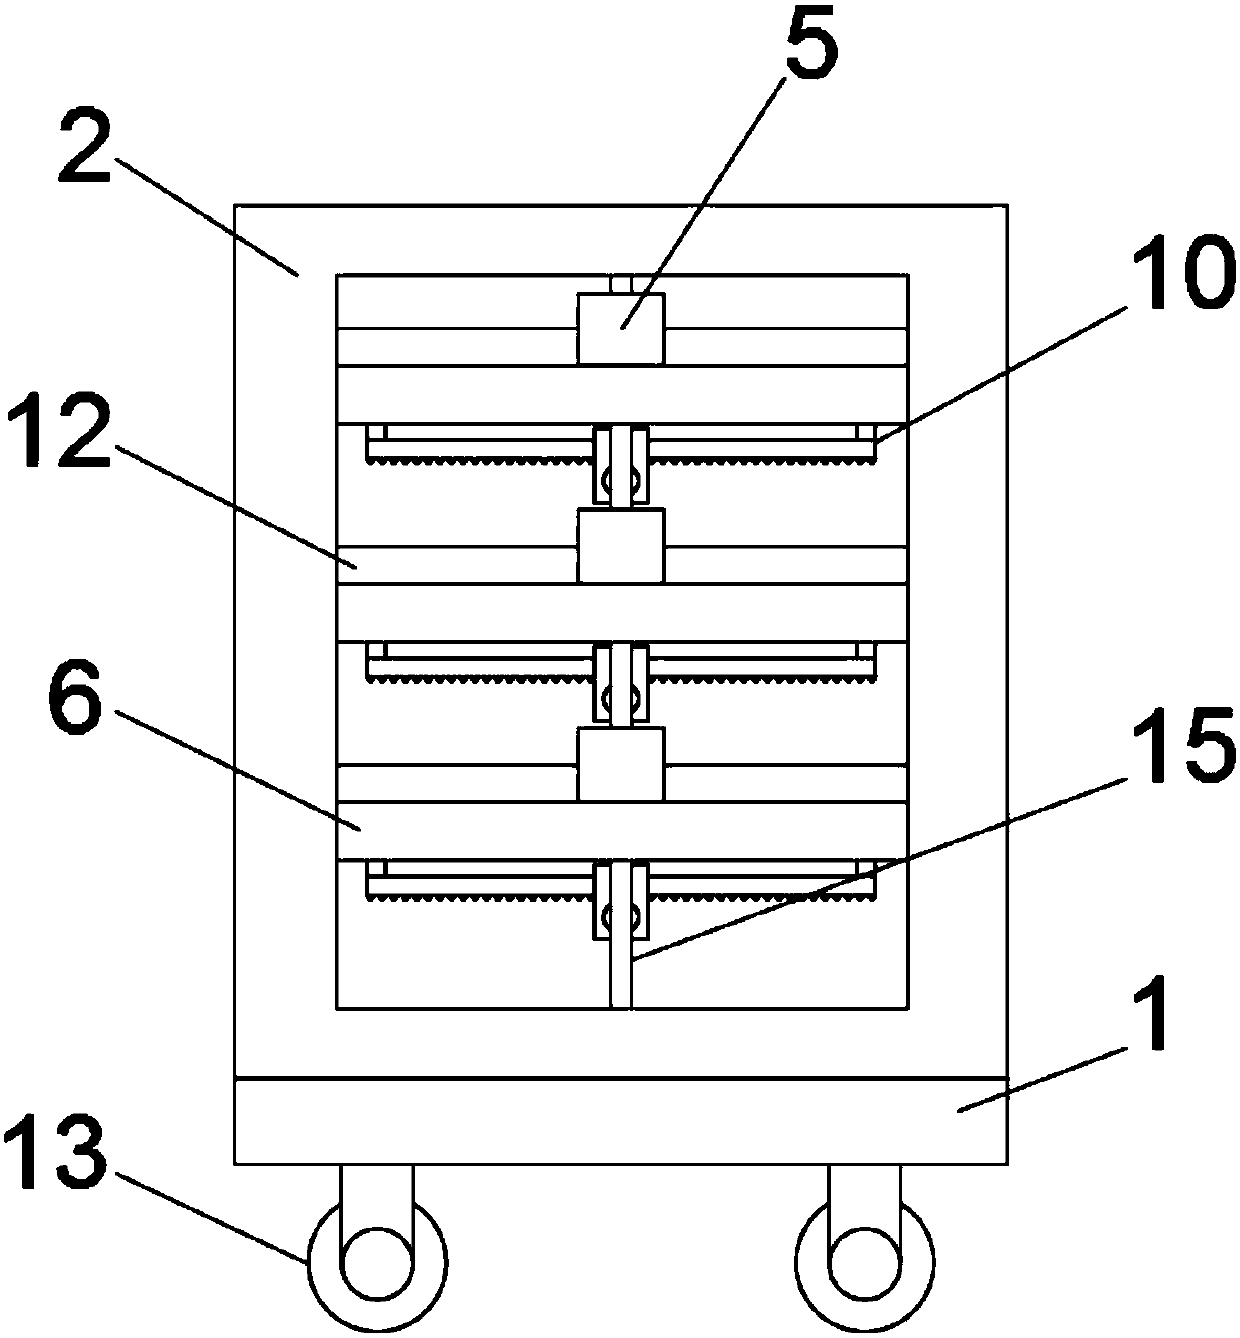 Transferring device for production and machining of automobile parts